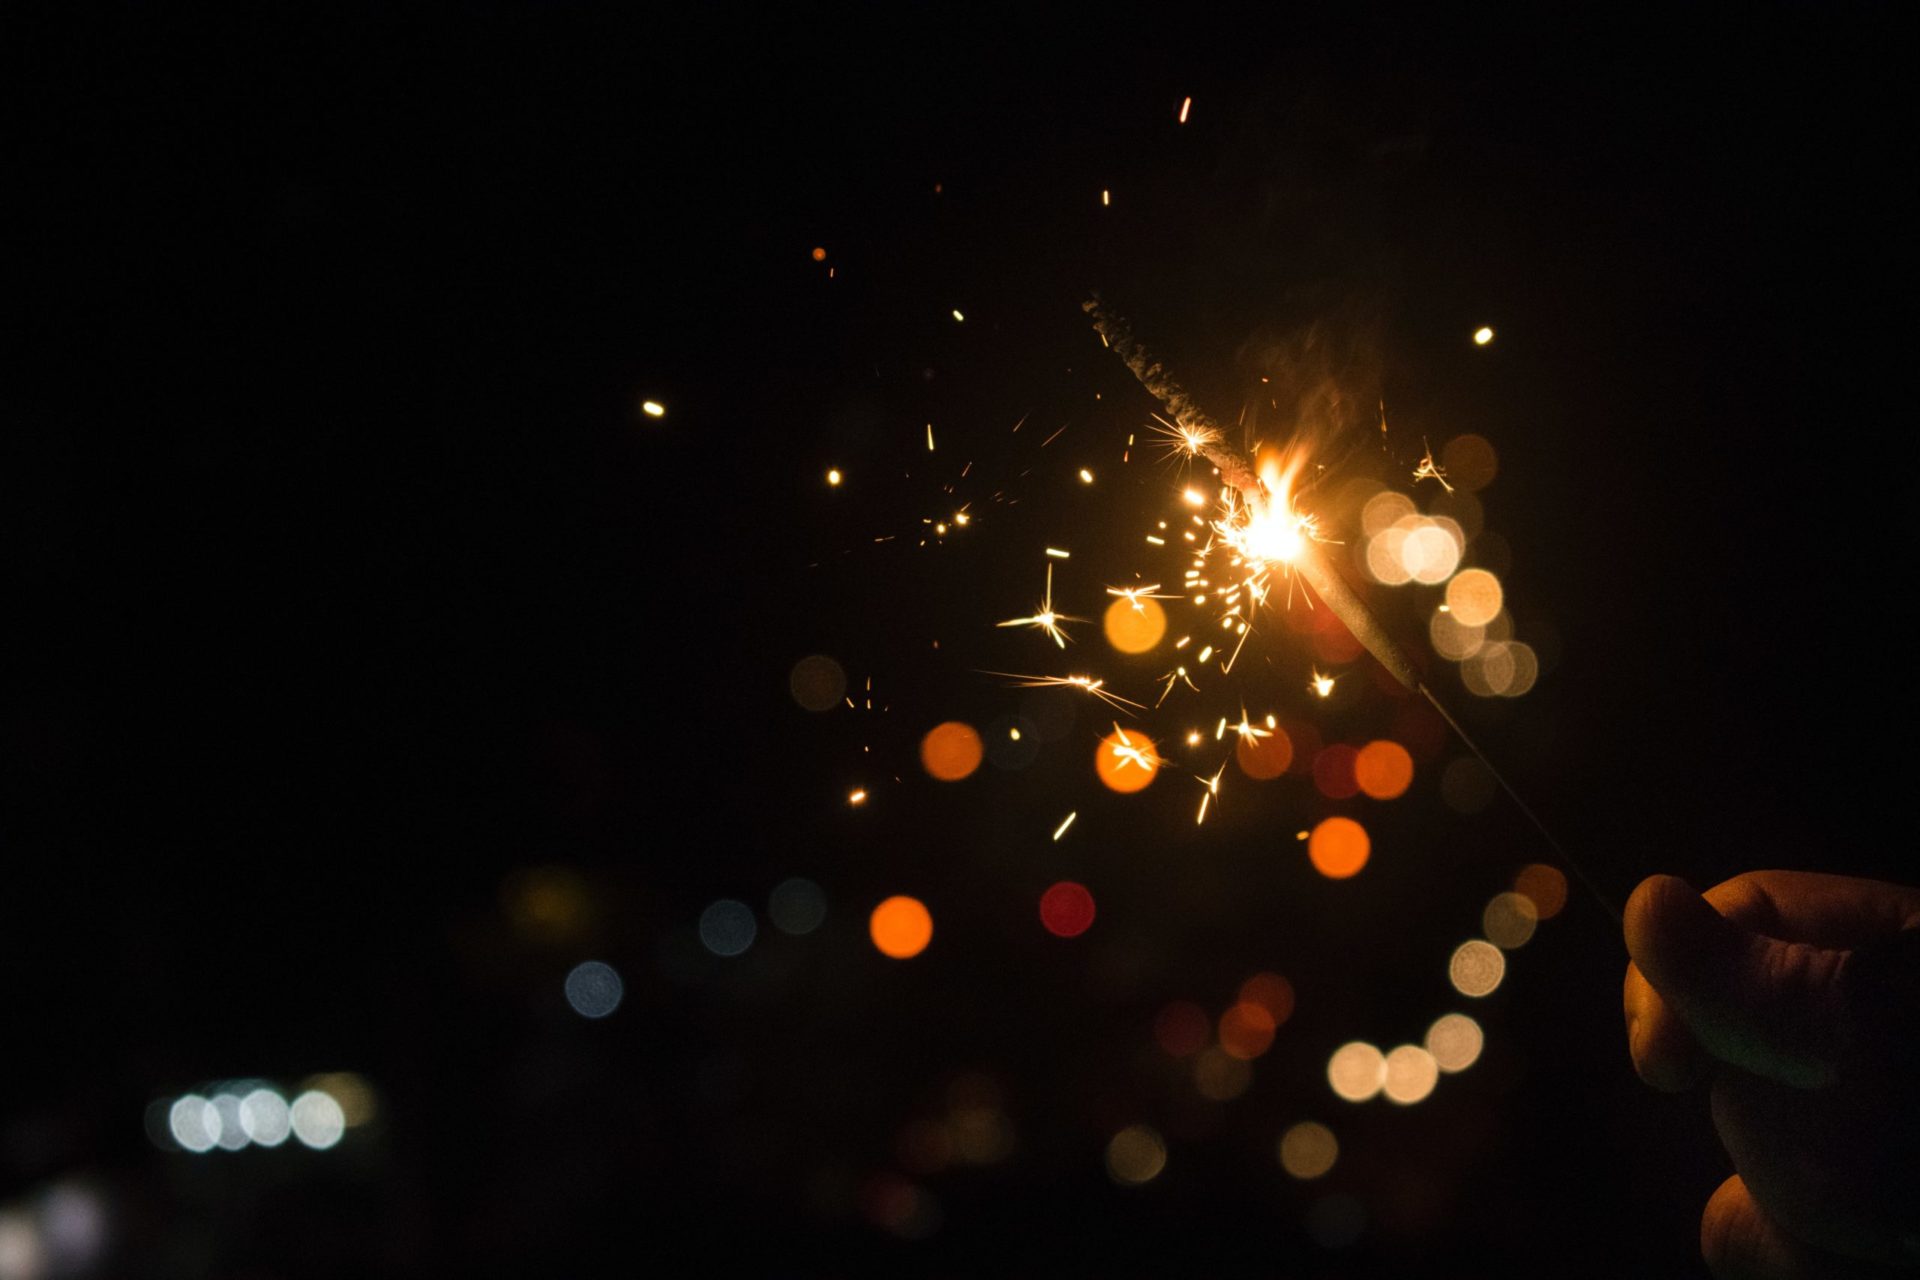 A sparkler is held by a hand against a black background.